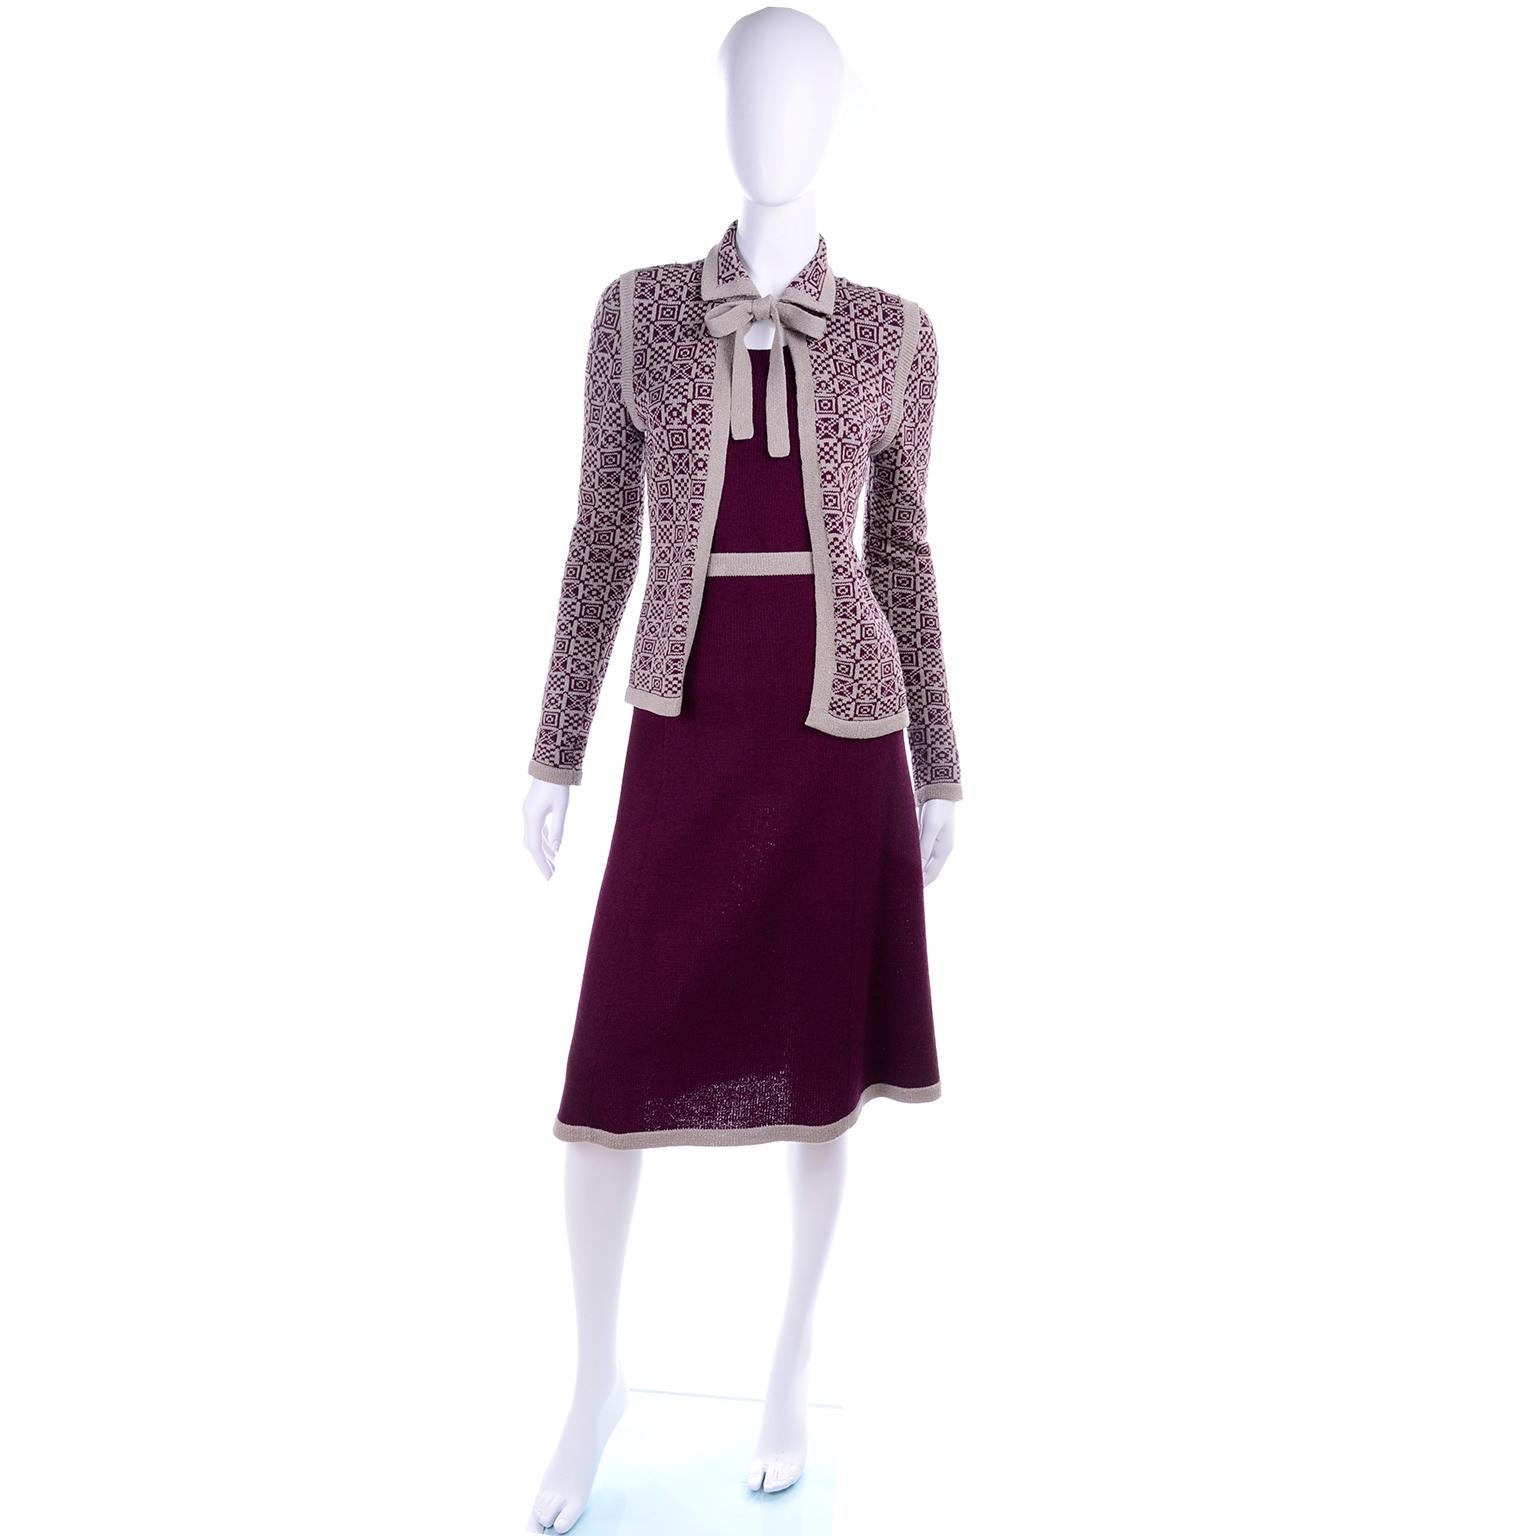 This is a fabulous Adolfo vintage ensemble that includes a 2 piece dress with a sleeveless burgundy knit tank and skirt, and an open front burgundy and tan print cardigan sweater jacket that closes with a bow at the neck.  We love Adolfo and really